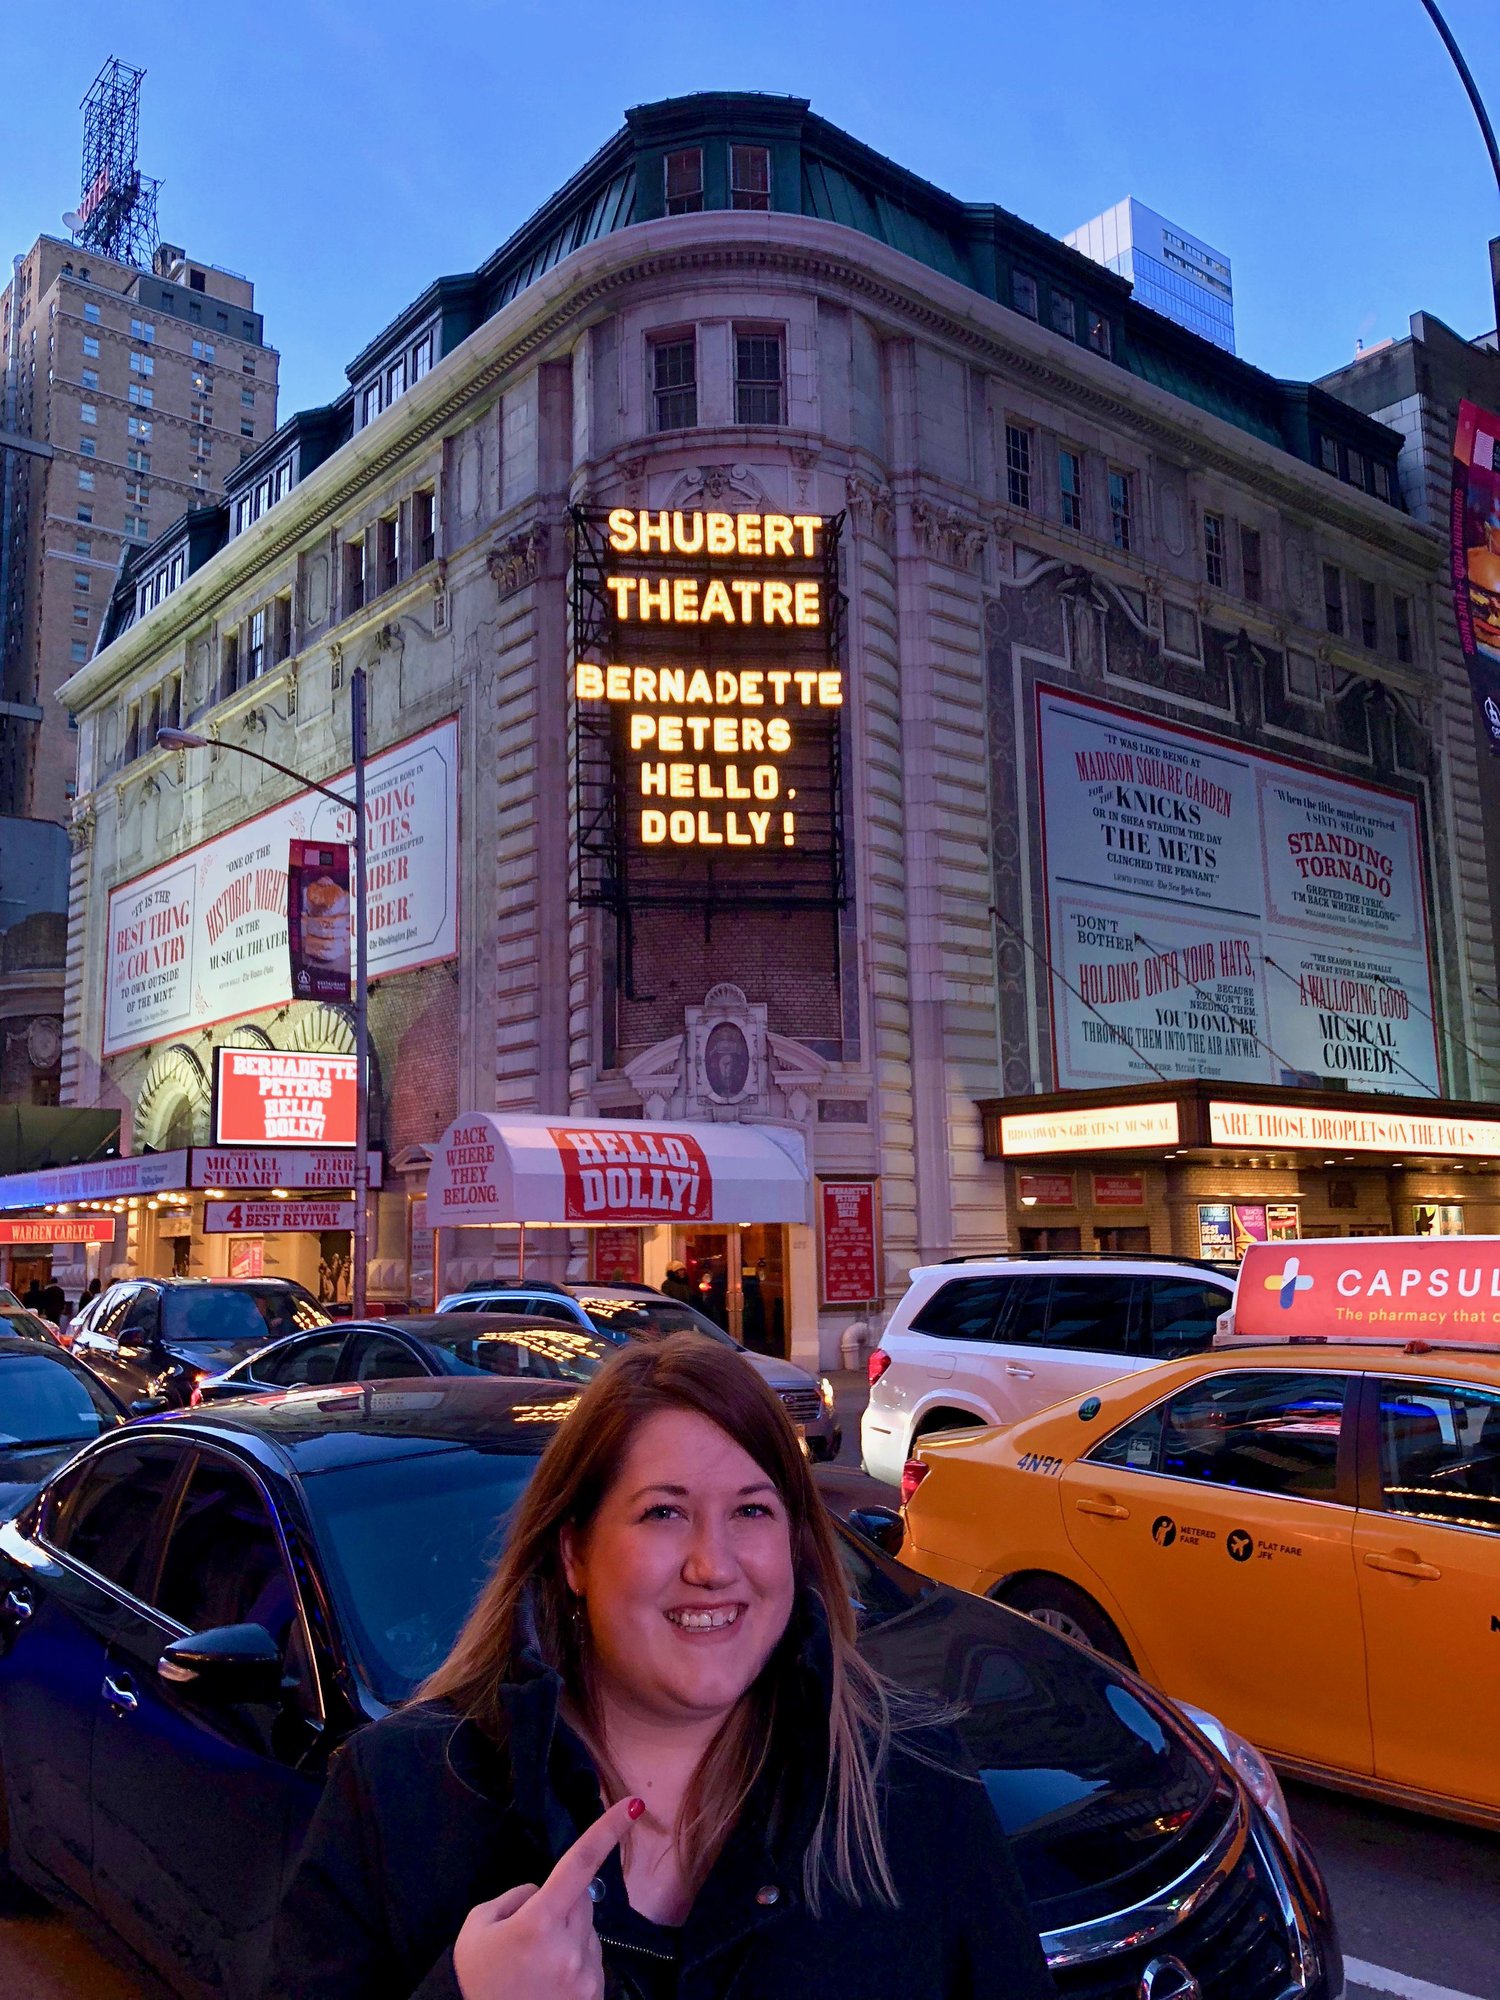 So thrilled to see Bernadette Peters on Broadway...she was fabulous!